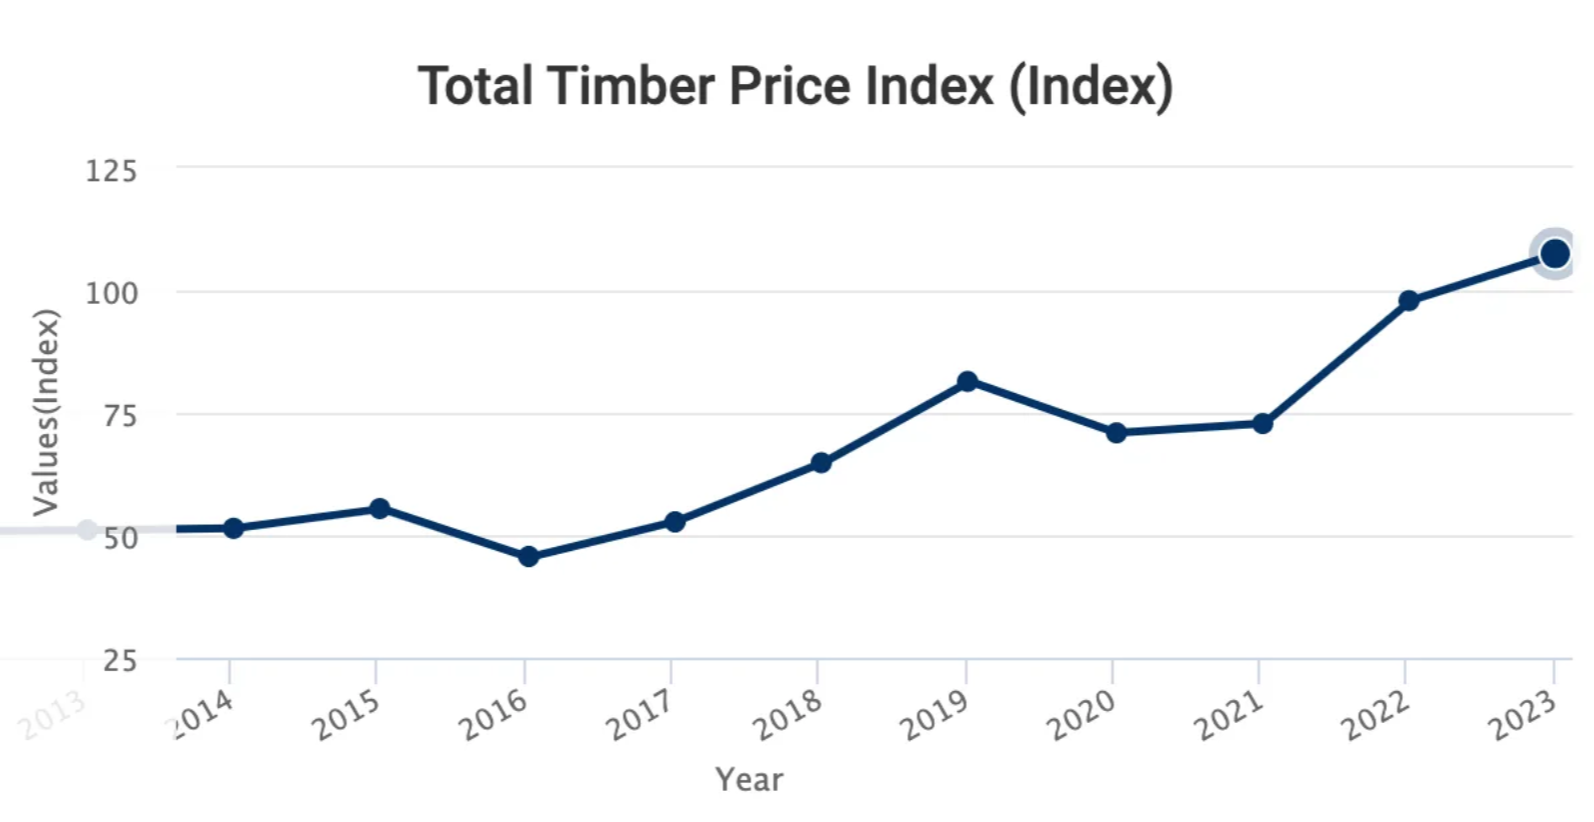 Timber Price Index Graph - Illustrating the Trends and Fluctuations in Timber Market Prices